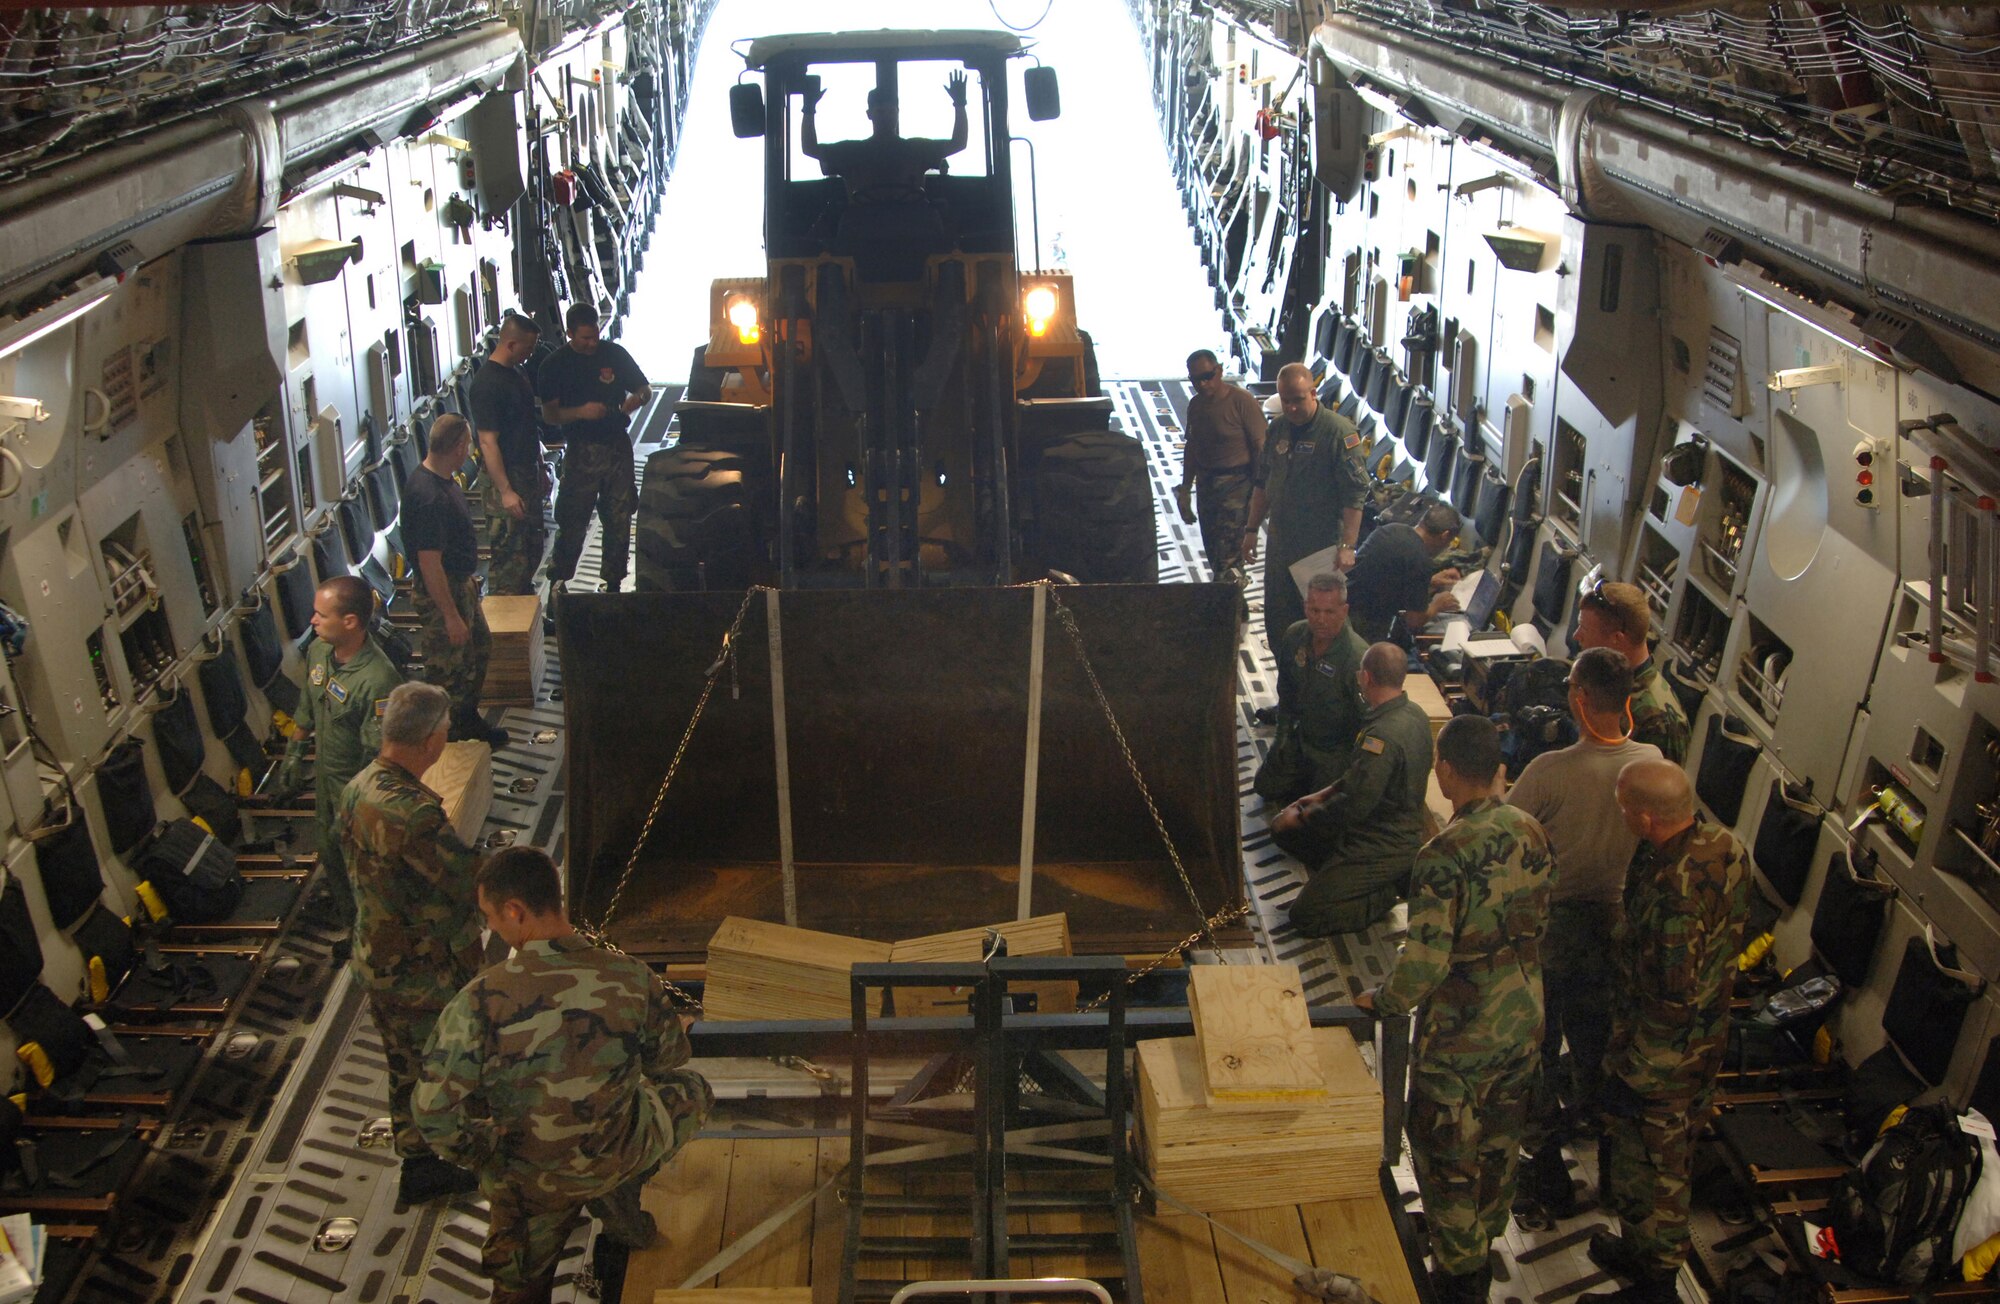 Airmen from the 300th Airlift Squadron at Charleston Air Force Base, S.C., and the 433rd Civil Engineer Squadron at Lackland AFB, Texas, load cargo at a Saint Lucia airport for a return flight on Sunday, April 9, 2006. The aircrew delivered construction materials and Reserve civil engineers who are building an operations center and barracks for the police force in support of Saint Lucia's counter-drug operations.  (U.S. Air Force photo/Tech. Sgt. Larry A. Simmons)